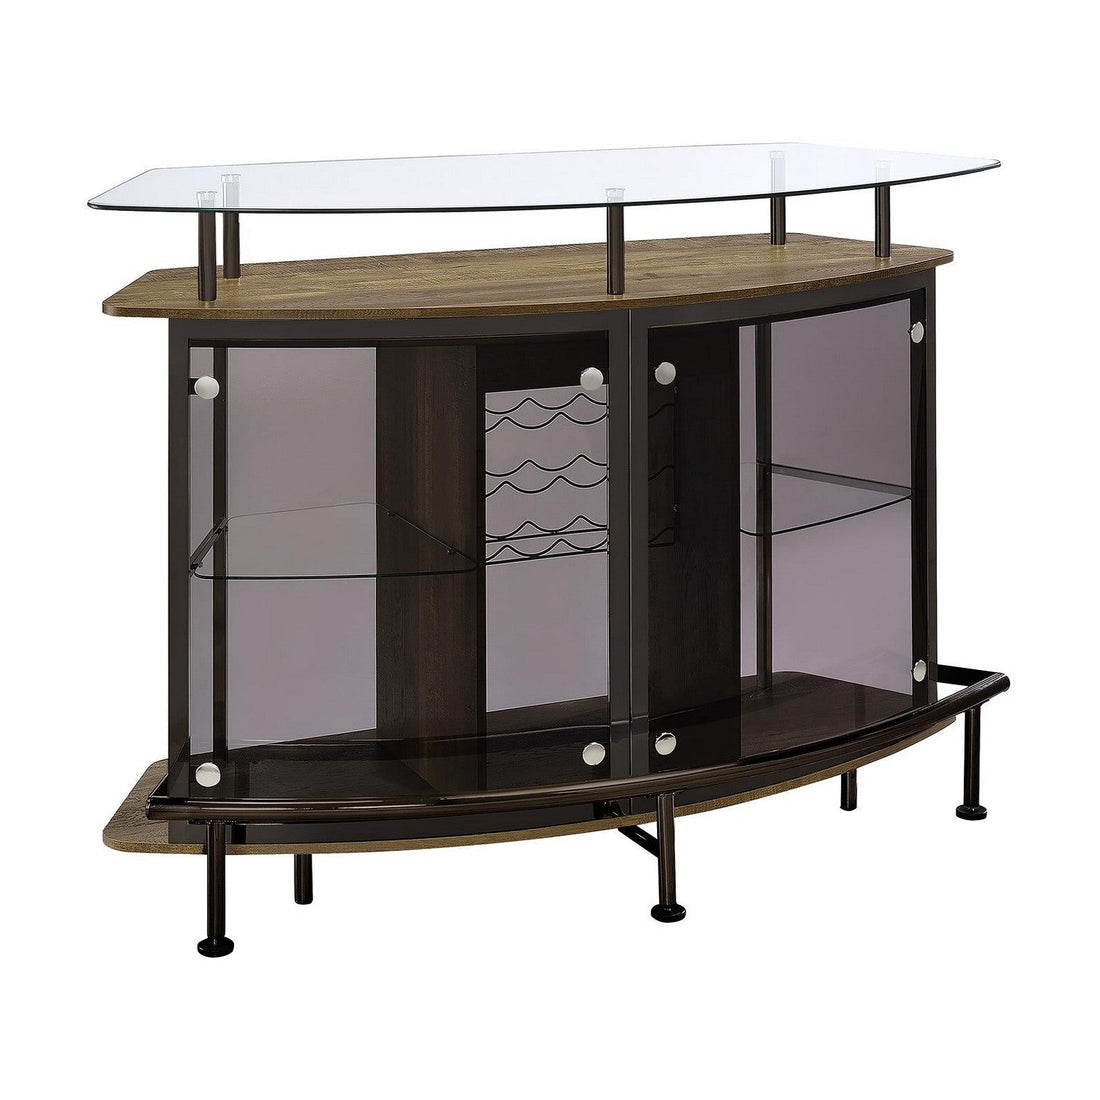 Gideon Crescent Shaped Glass Top Bar Unit with Drawer 182236